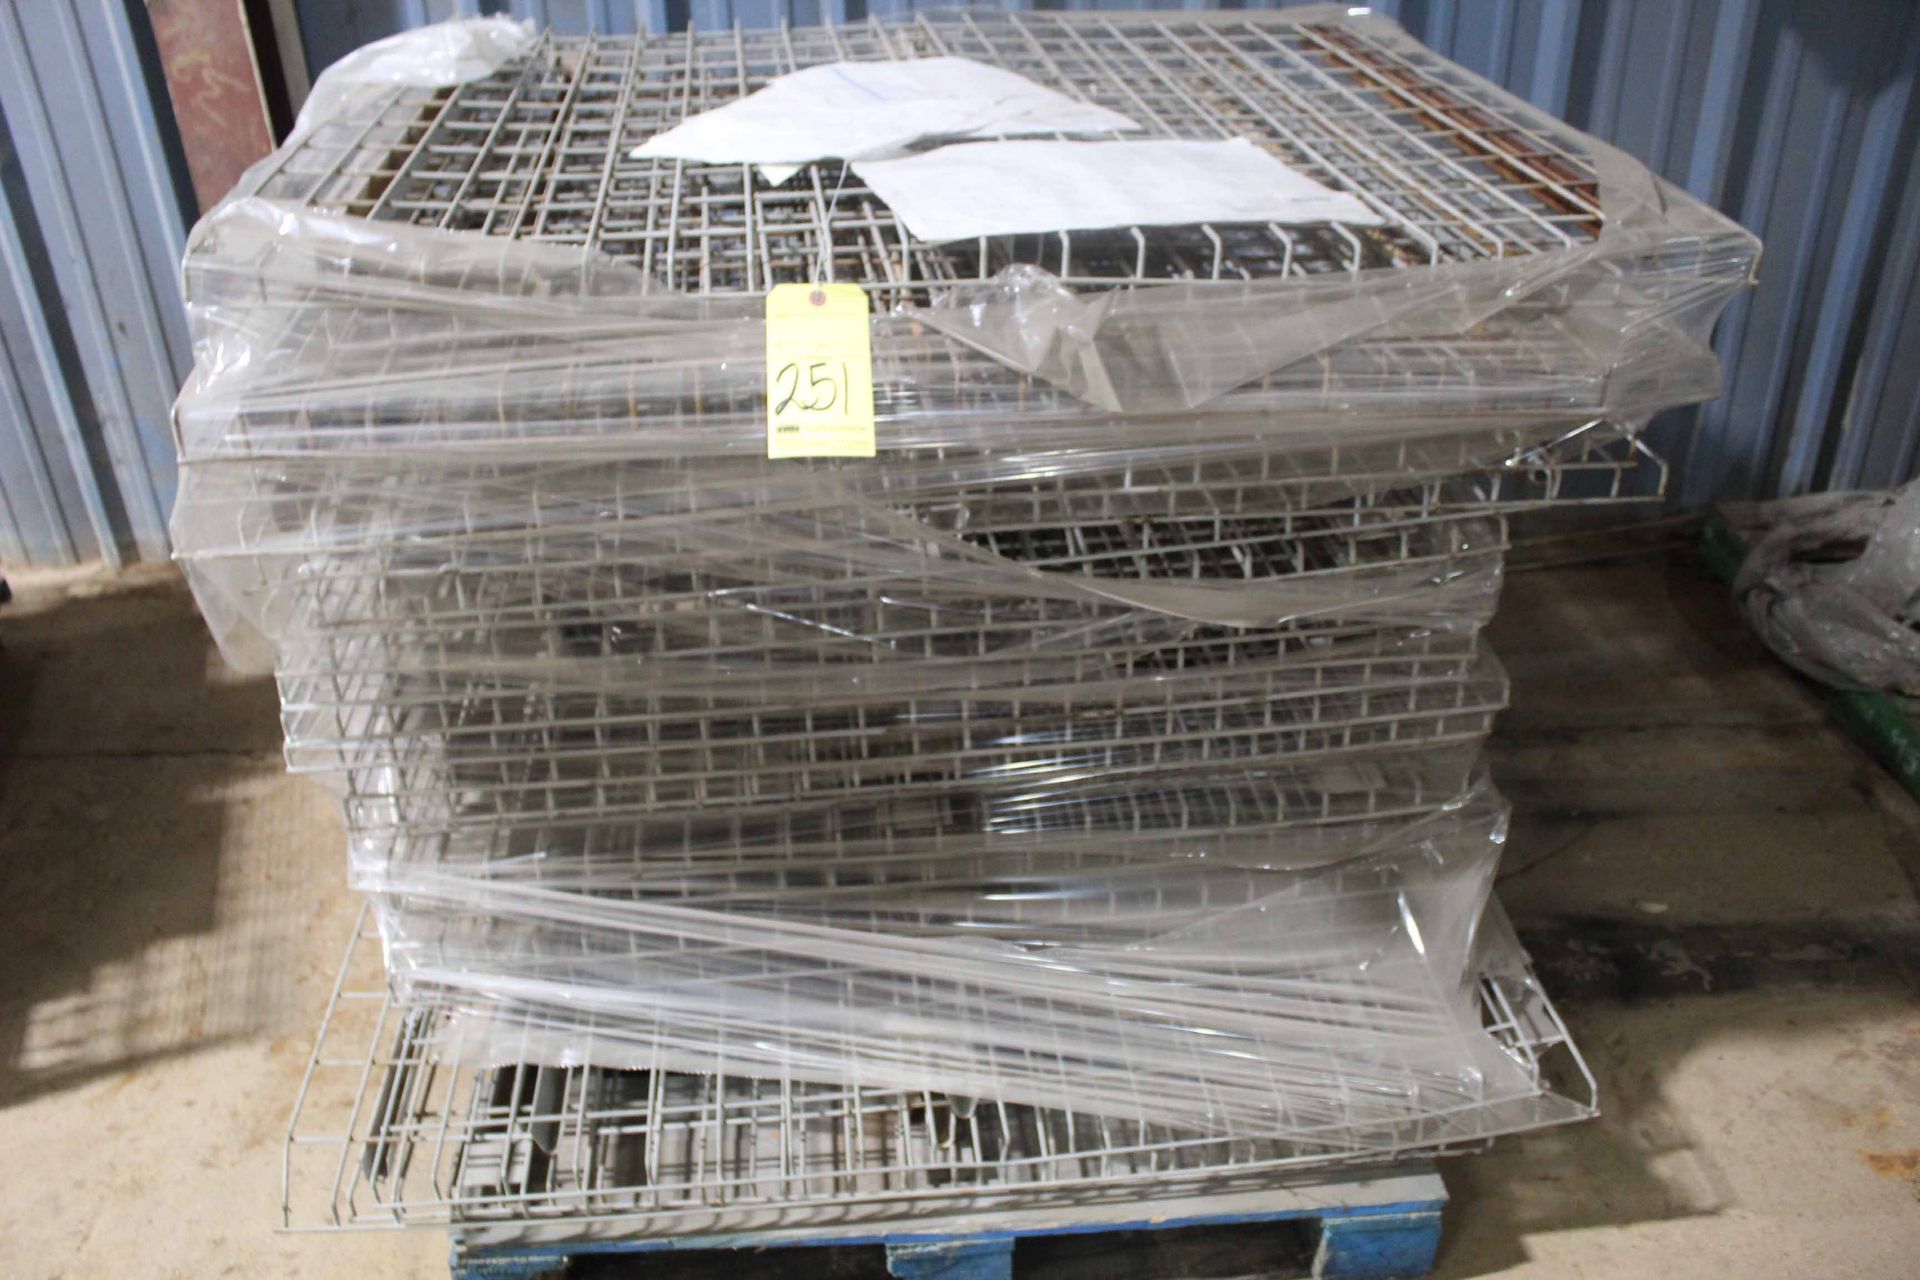 LOT OF WIRE BASKETS (on one pallet)